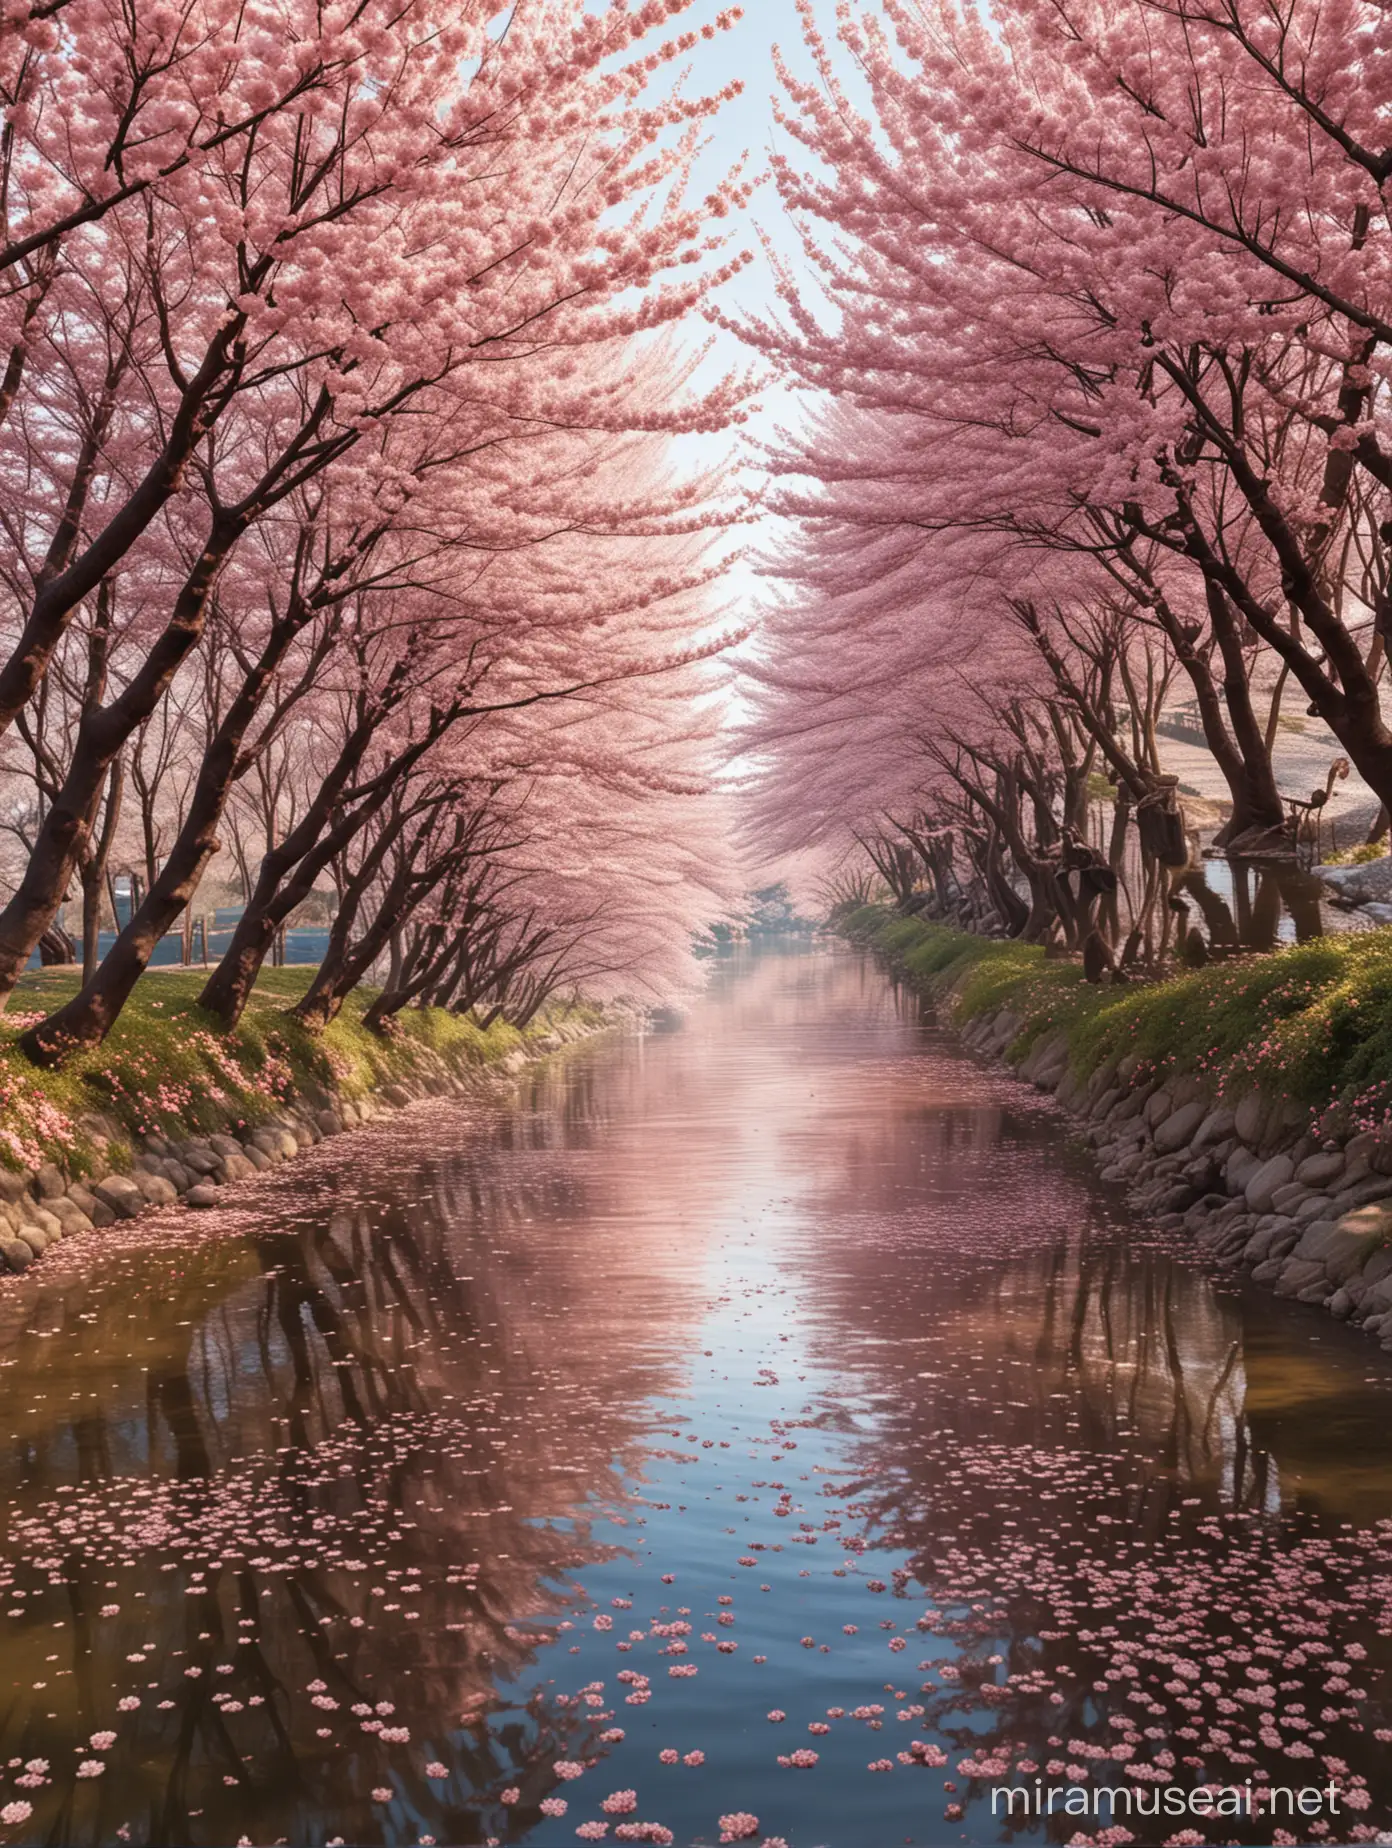 A breathtakingly beautiful real-life photograph of a river lined with fully bloomed cherry blossom trees on onesides, the river is covered with cherry blossom petals, sunlight filtering through the petals creating a serene and magical atmosphere, high resolution